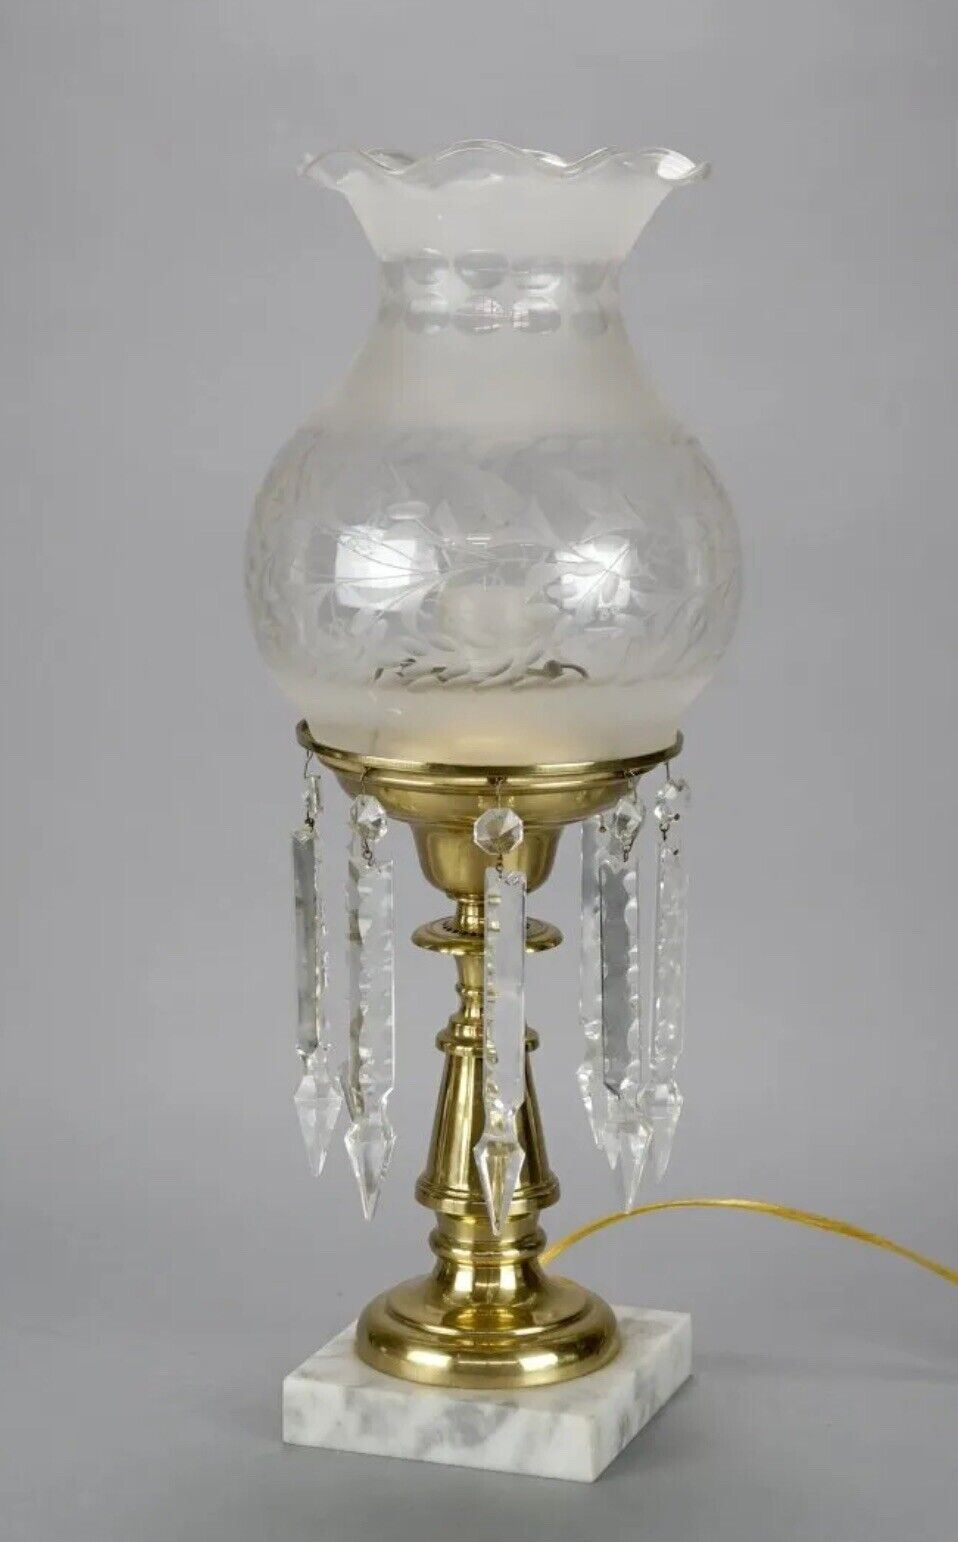 Antique Victorian Astral Lamp with a Floral Cut Glass Shade & Prisms